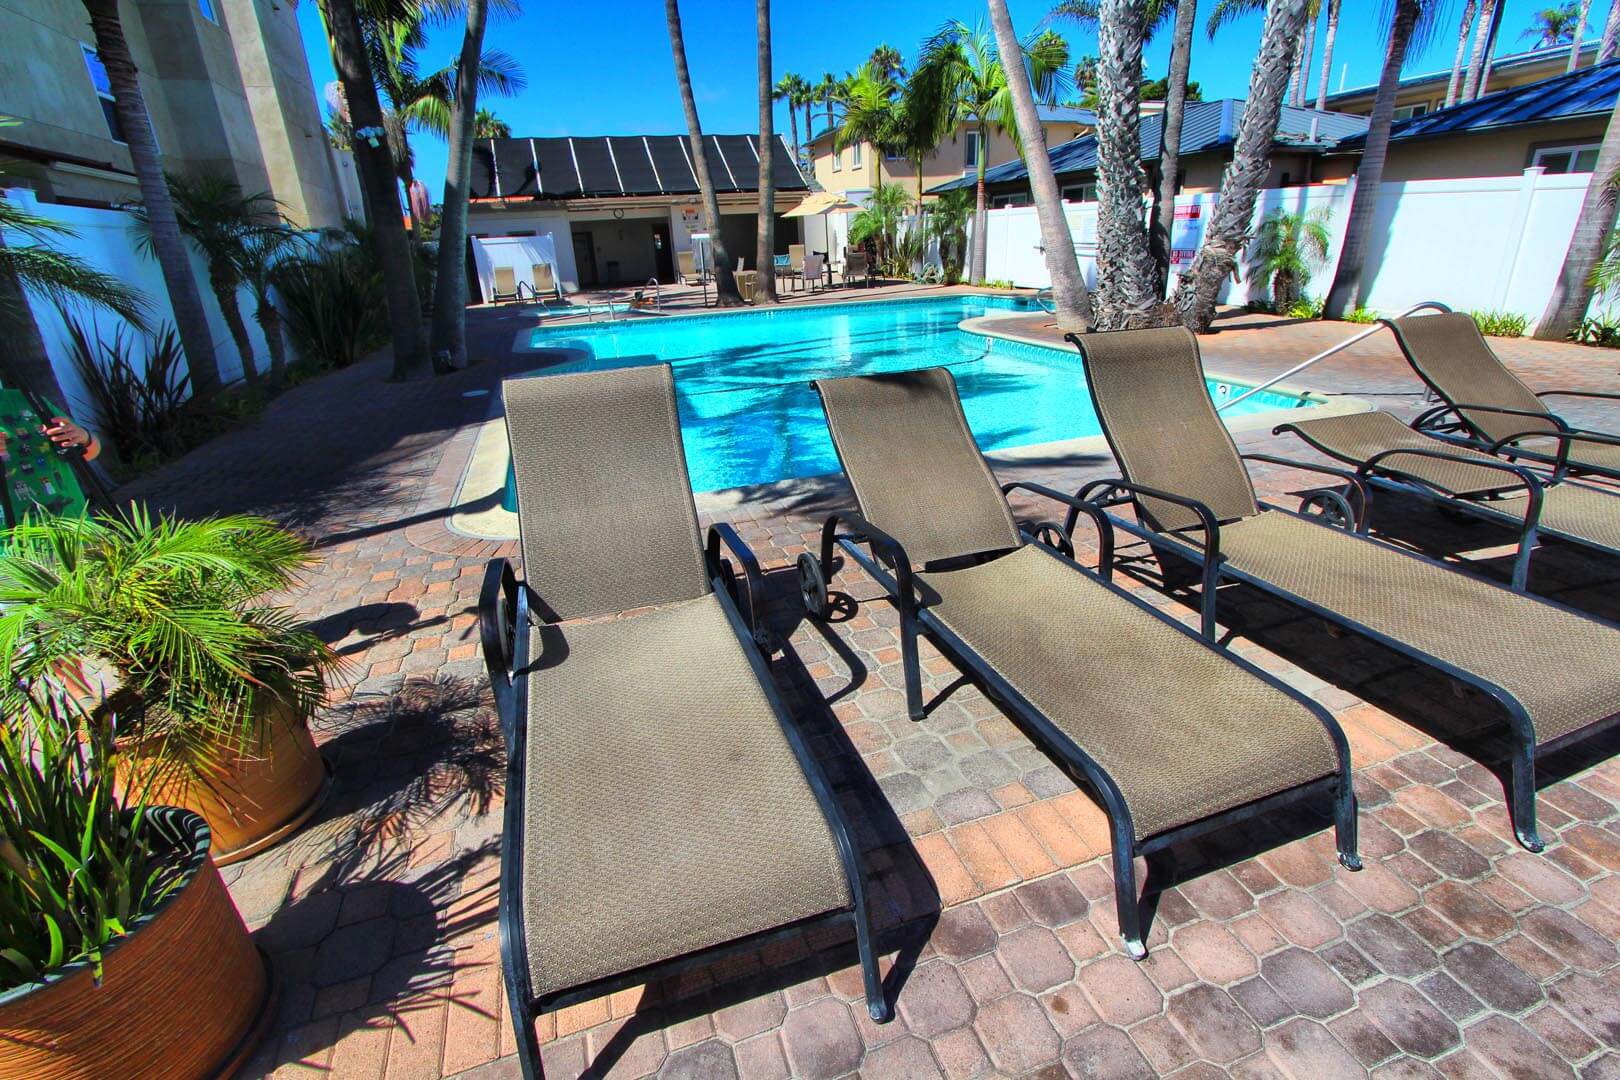 A relaxing outdoor pool at VRI's Capri by the Sea in San Diego, California.